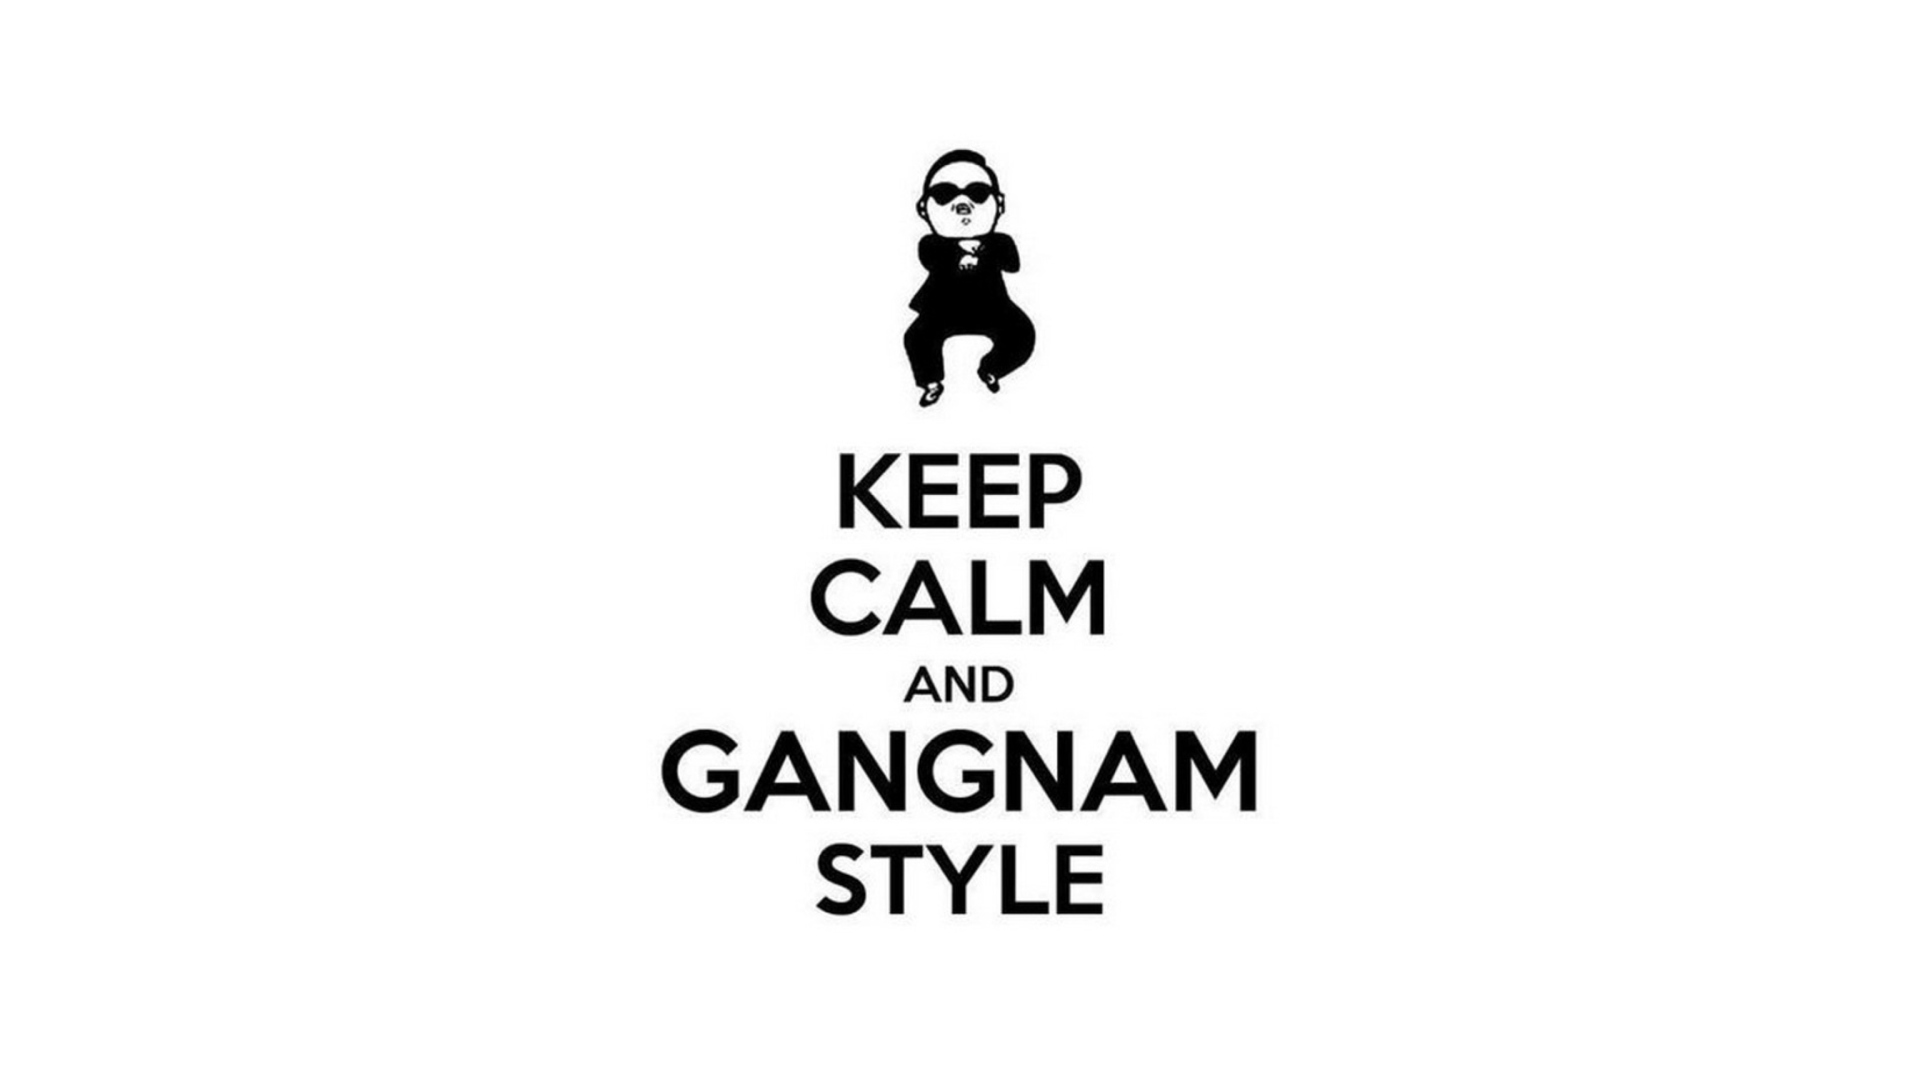 Keep Calm And Gangnam Style wallpaper 1920x1080